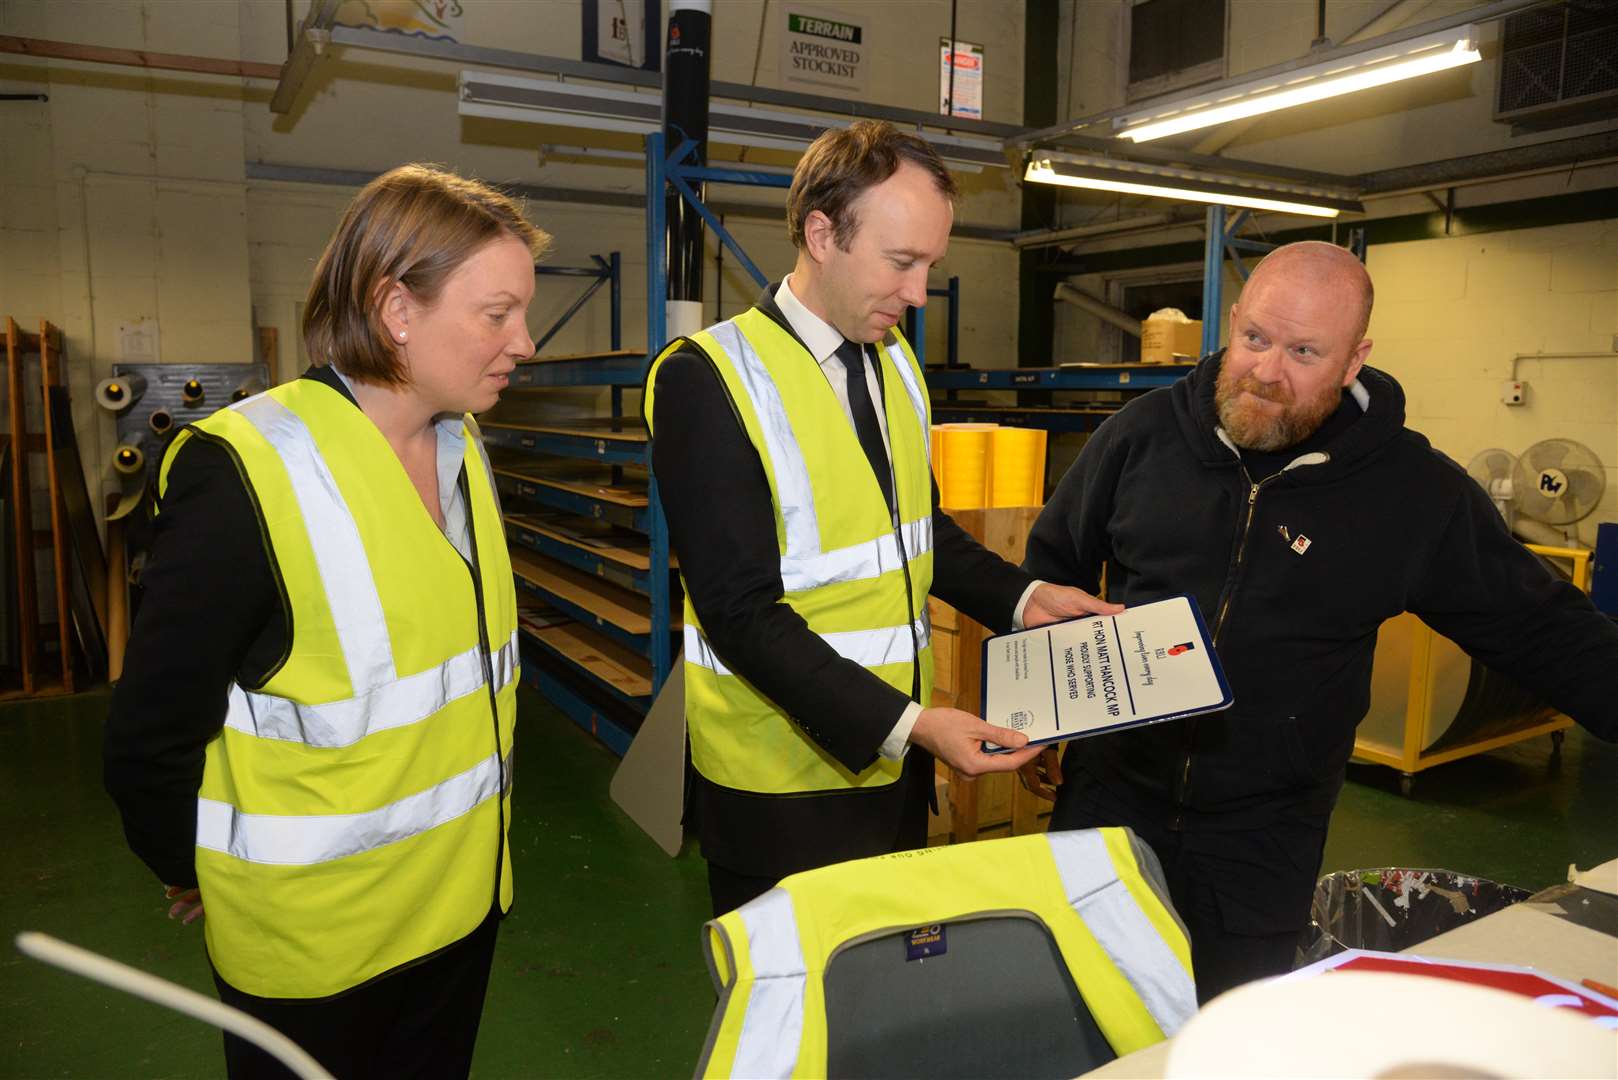 Tracey Crouch MP and Health and Social Care Secretary Matt Hancock meet former serviceman Tim Brown at the Royal British Legion Industries headquarters. Picture: Chris Davey